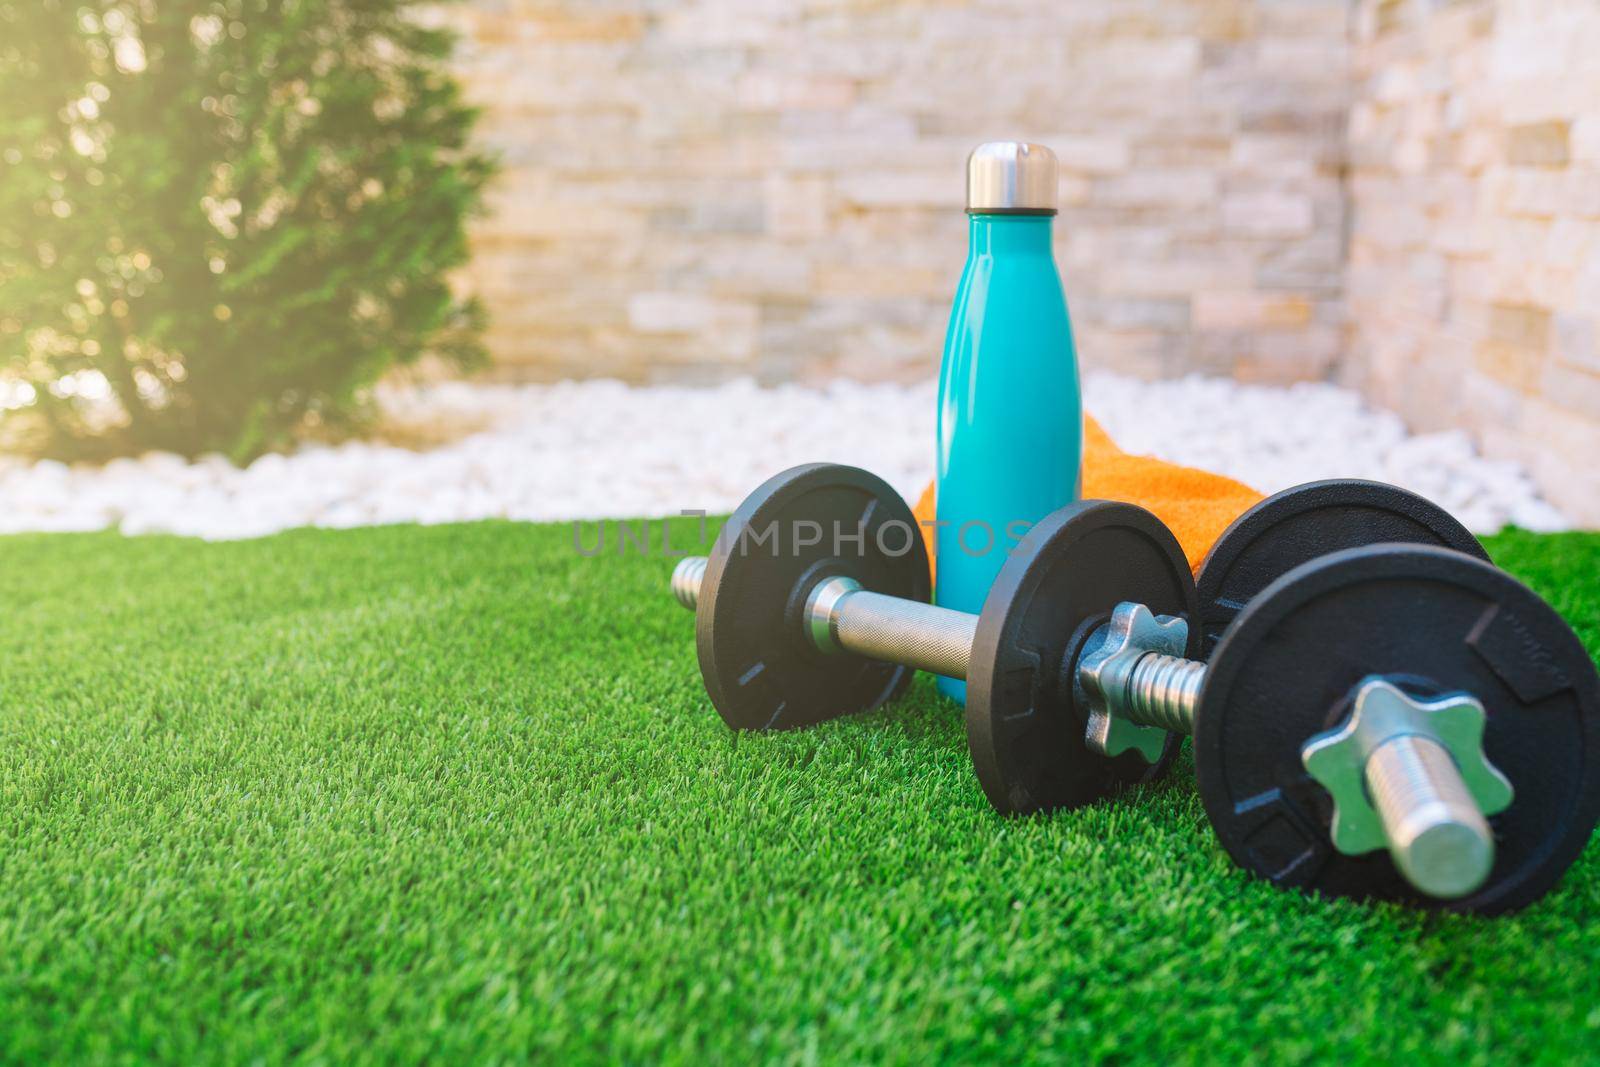 sports equipment on the green grass in the sunlit garden. orange towel, water bottle, weights. stone wall background. natural outdoor light.